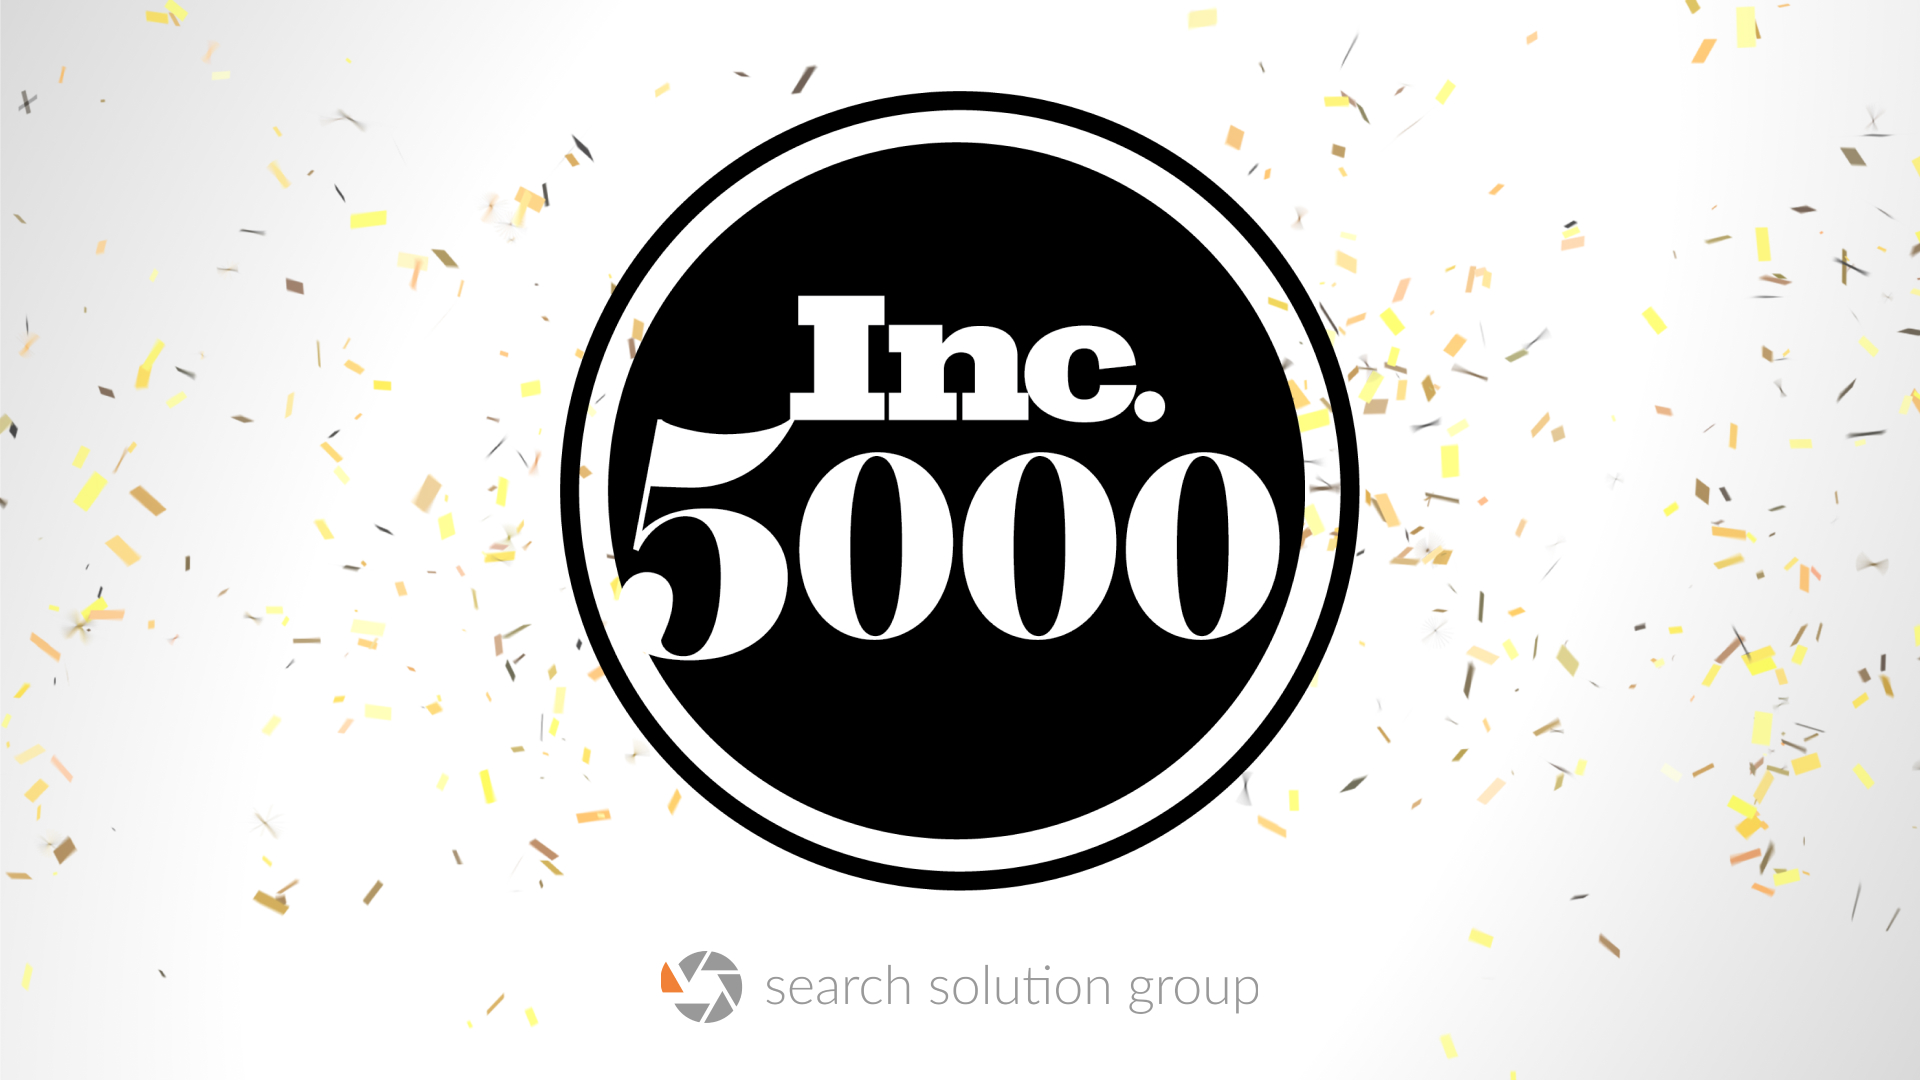 Search Solution Group Makes Inc. 5000 List For 5th Consecutive Year